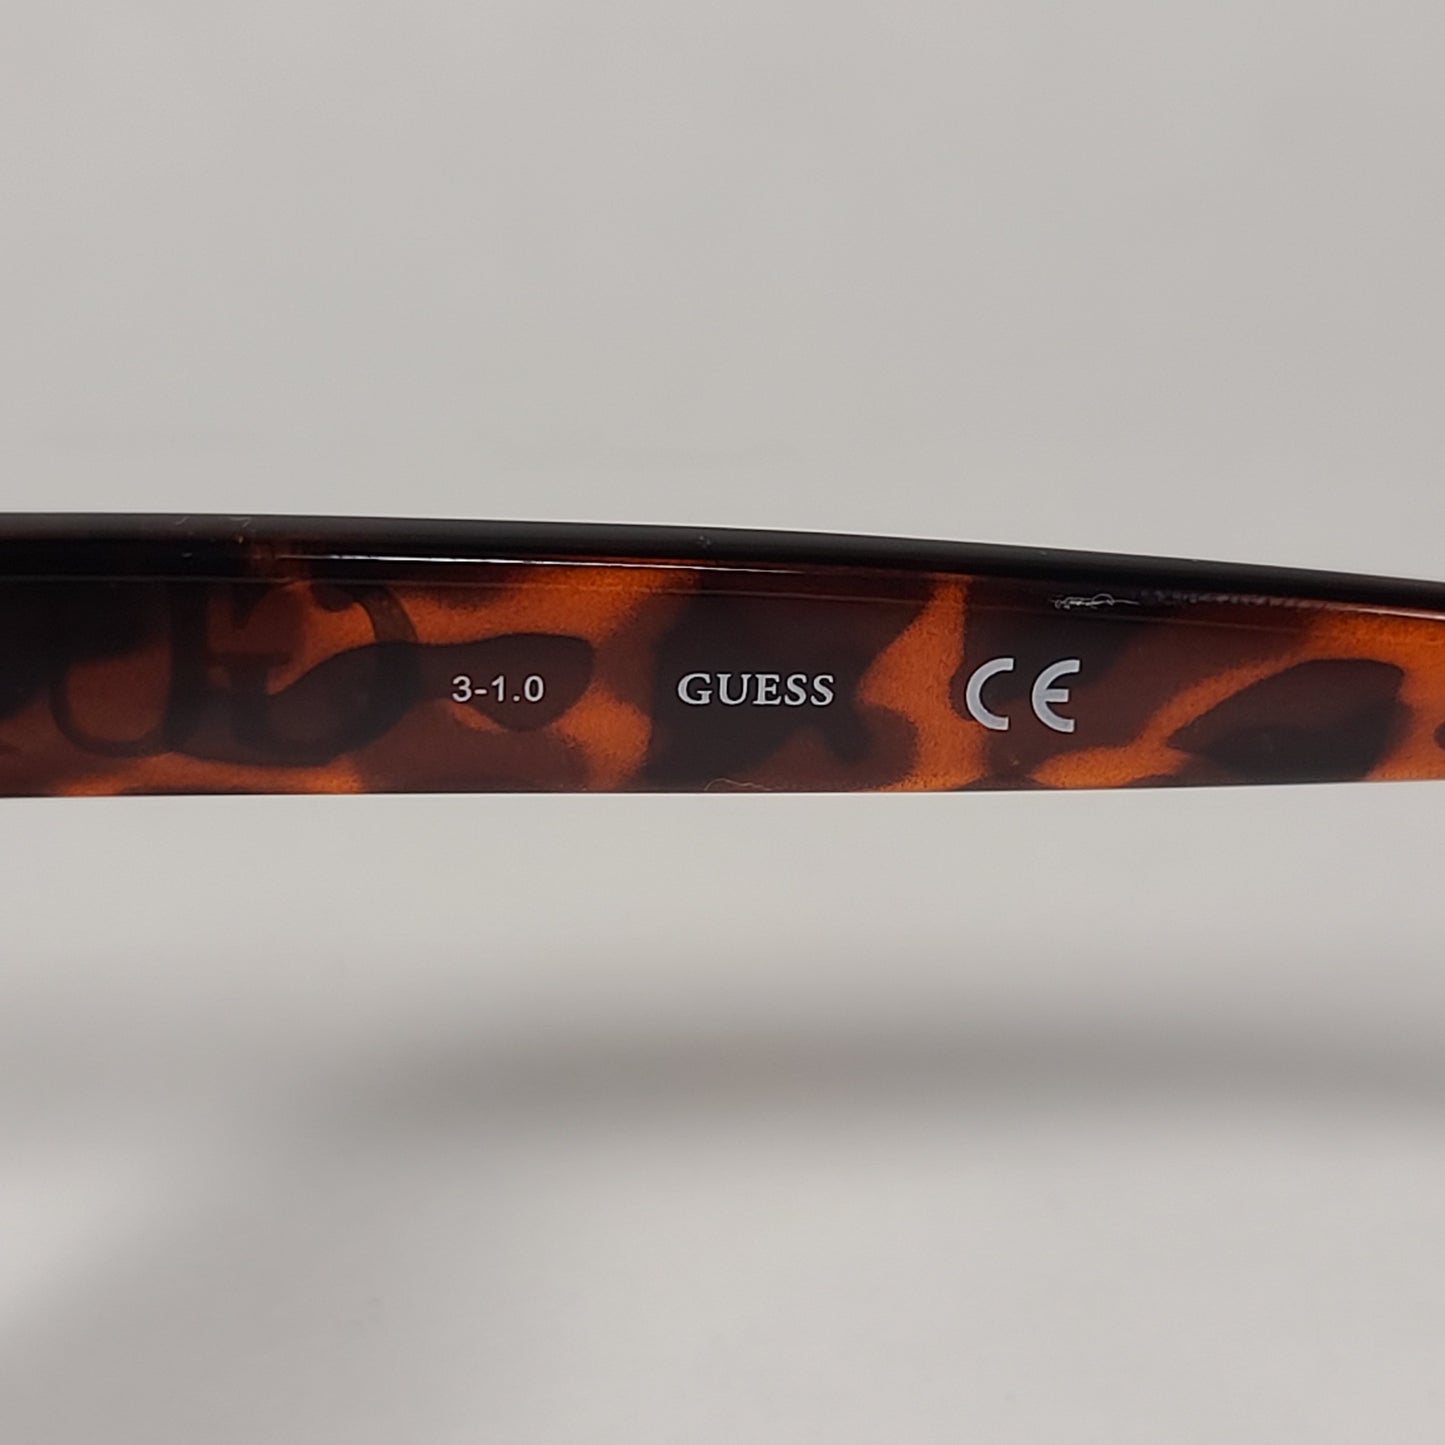 Guess Soft Round Sunglasses Brown Tortoise Frame Brown Gradient Lens GF0362 52F - Sunglasses